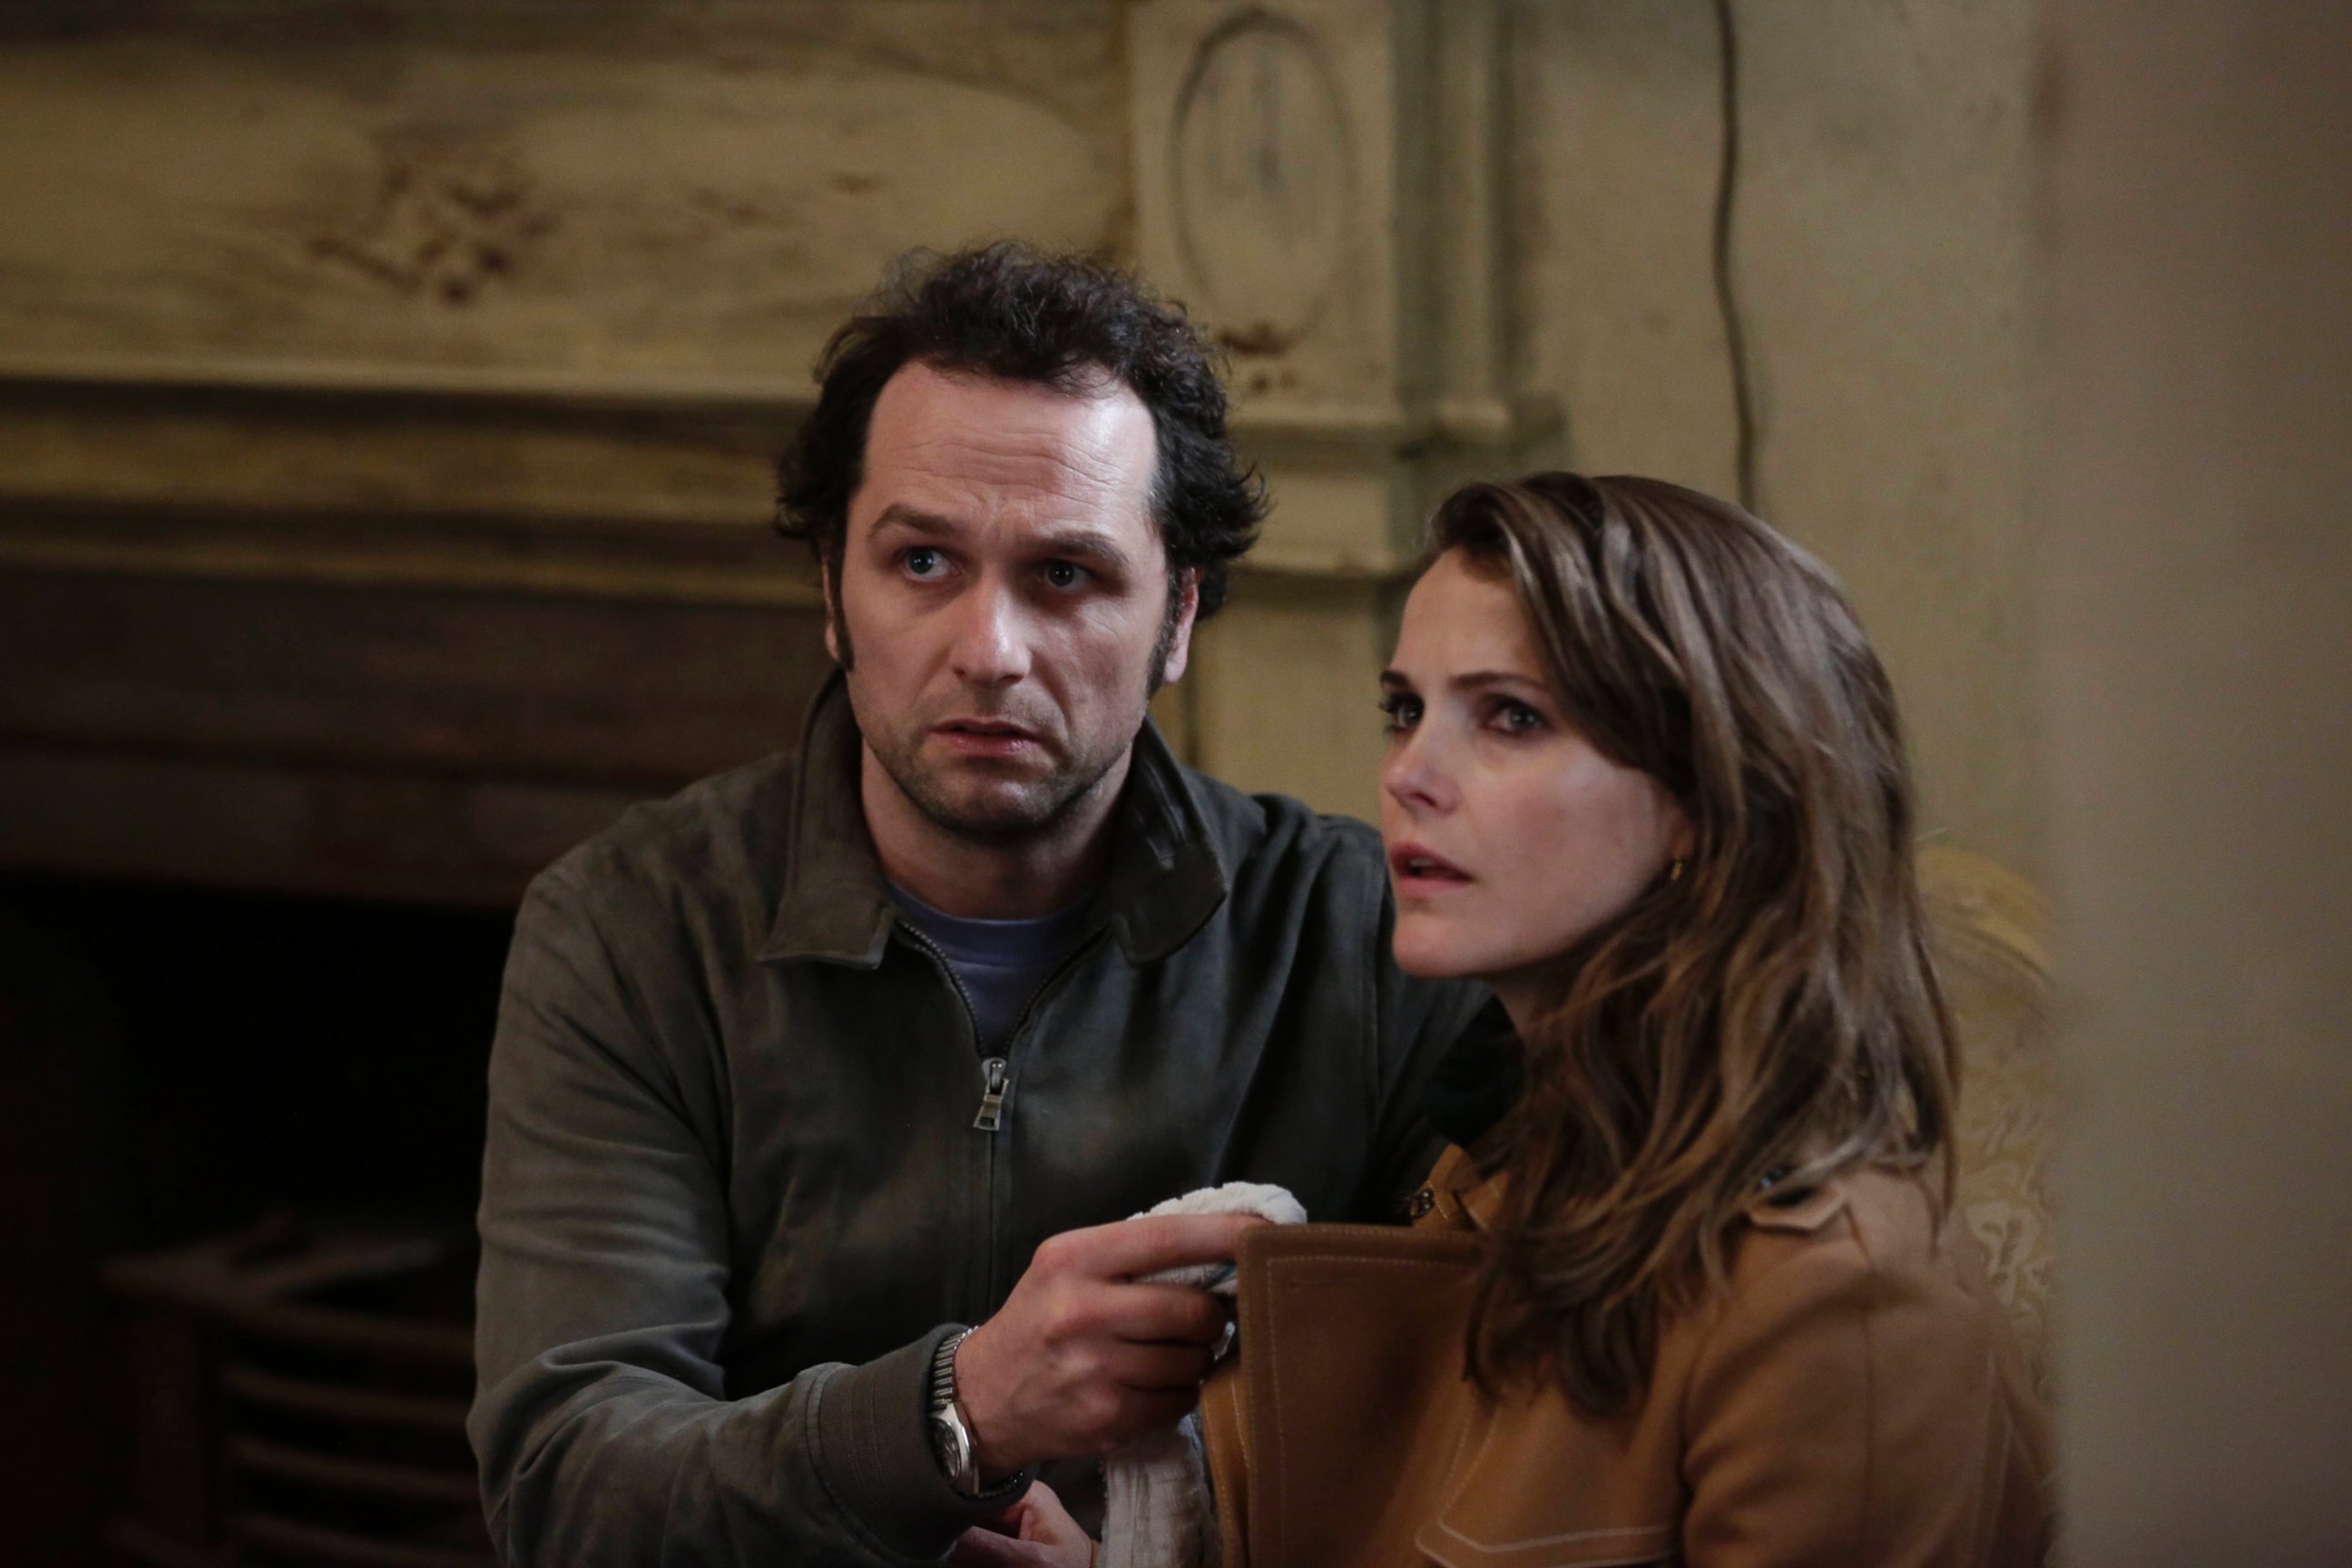 PHOTO: Matthew Rhys as Philip Jennings and Keri Russell as Elizabeth Jennings in the episode, "The Magic of David Copperfield V. The Statue of Liberty Disappears" of "The Americans" TV series.